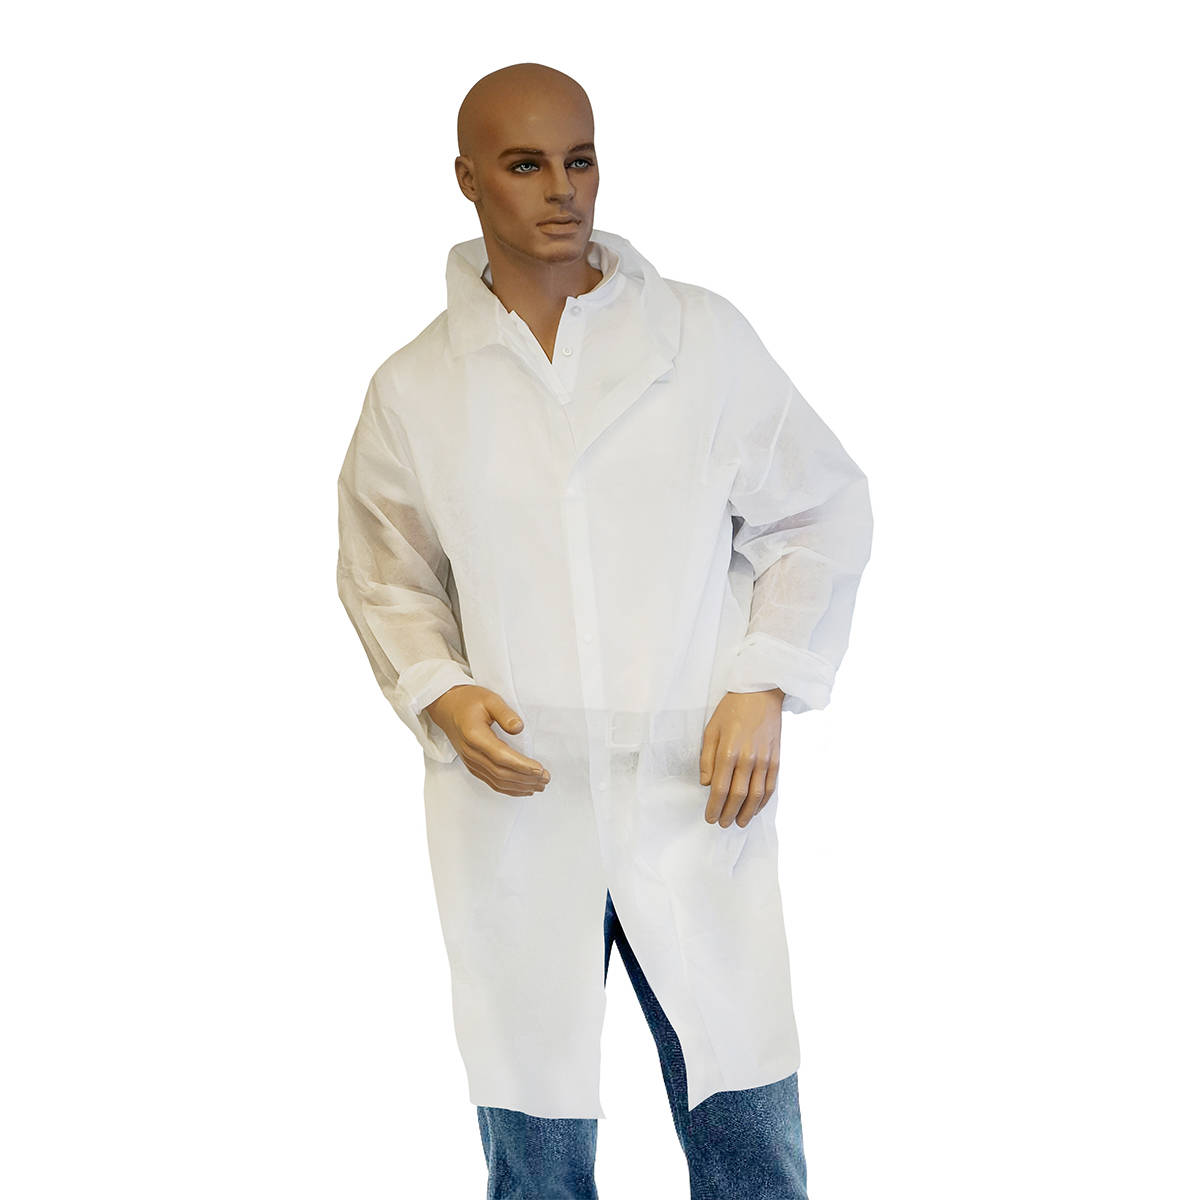 Doll wearing white visitor gown